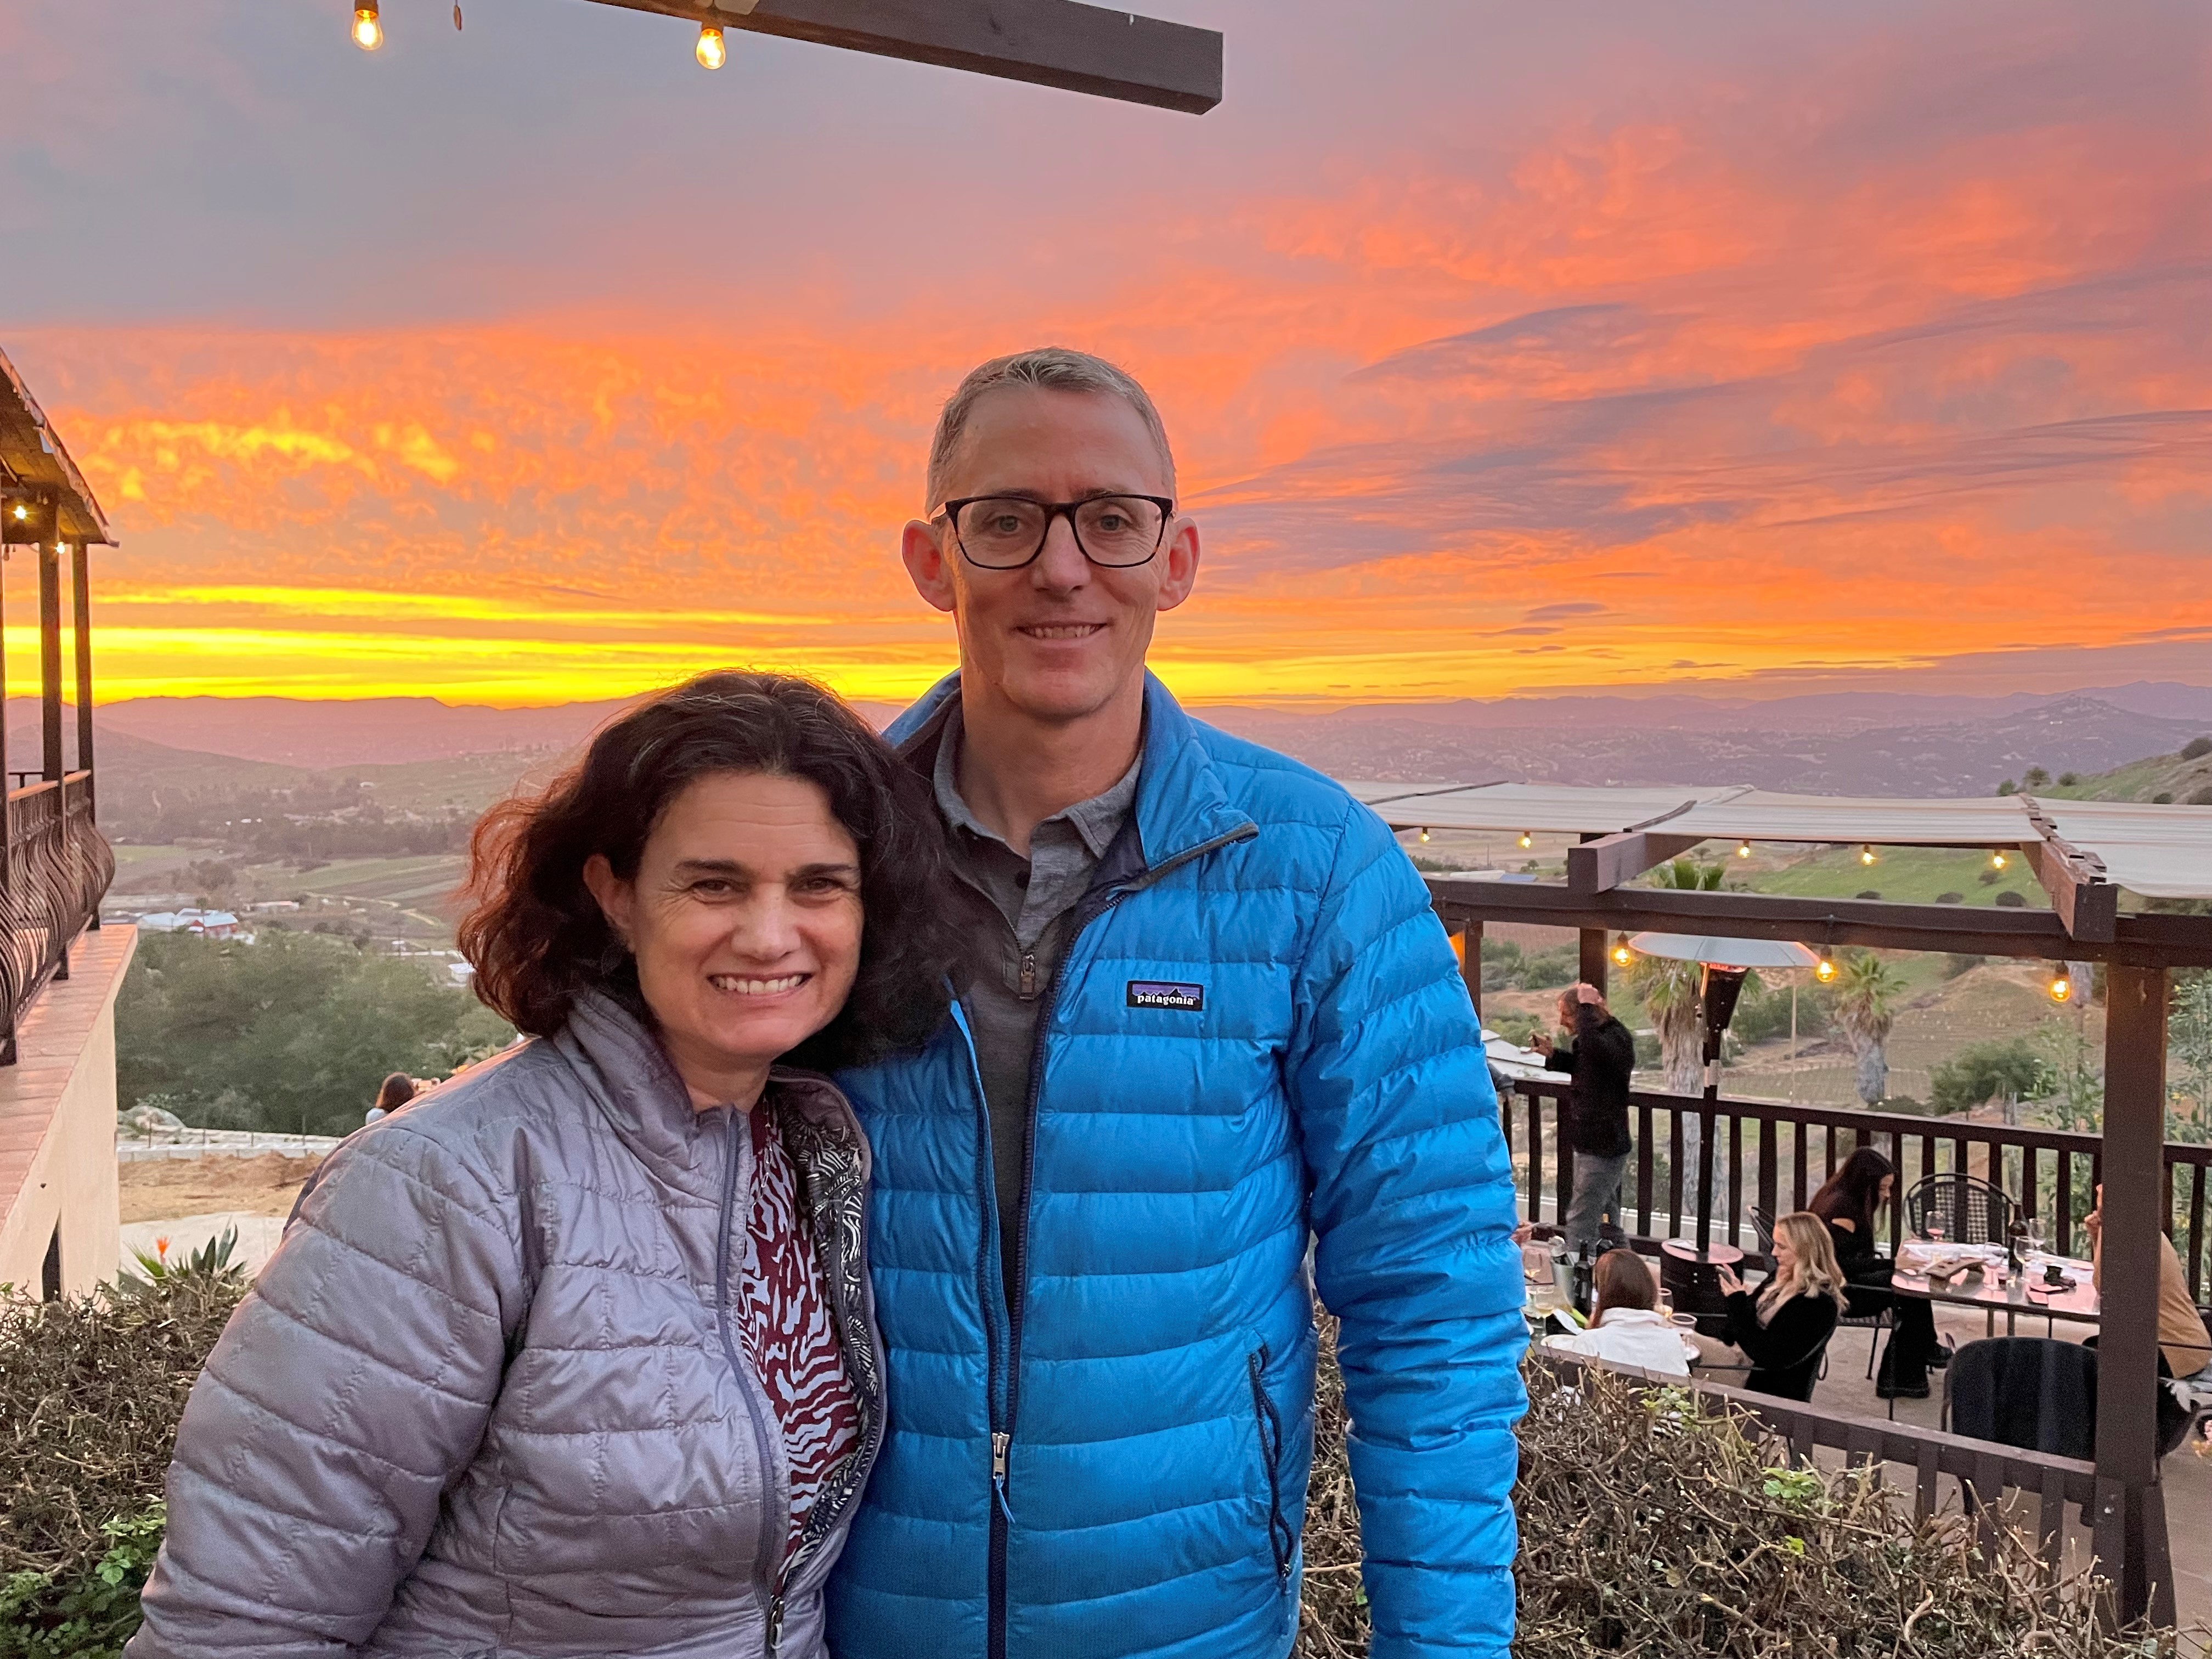 Shad Butte with his Wife at sunset on a balcony